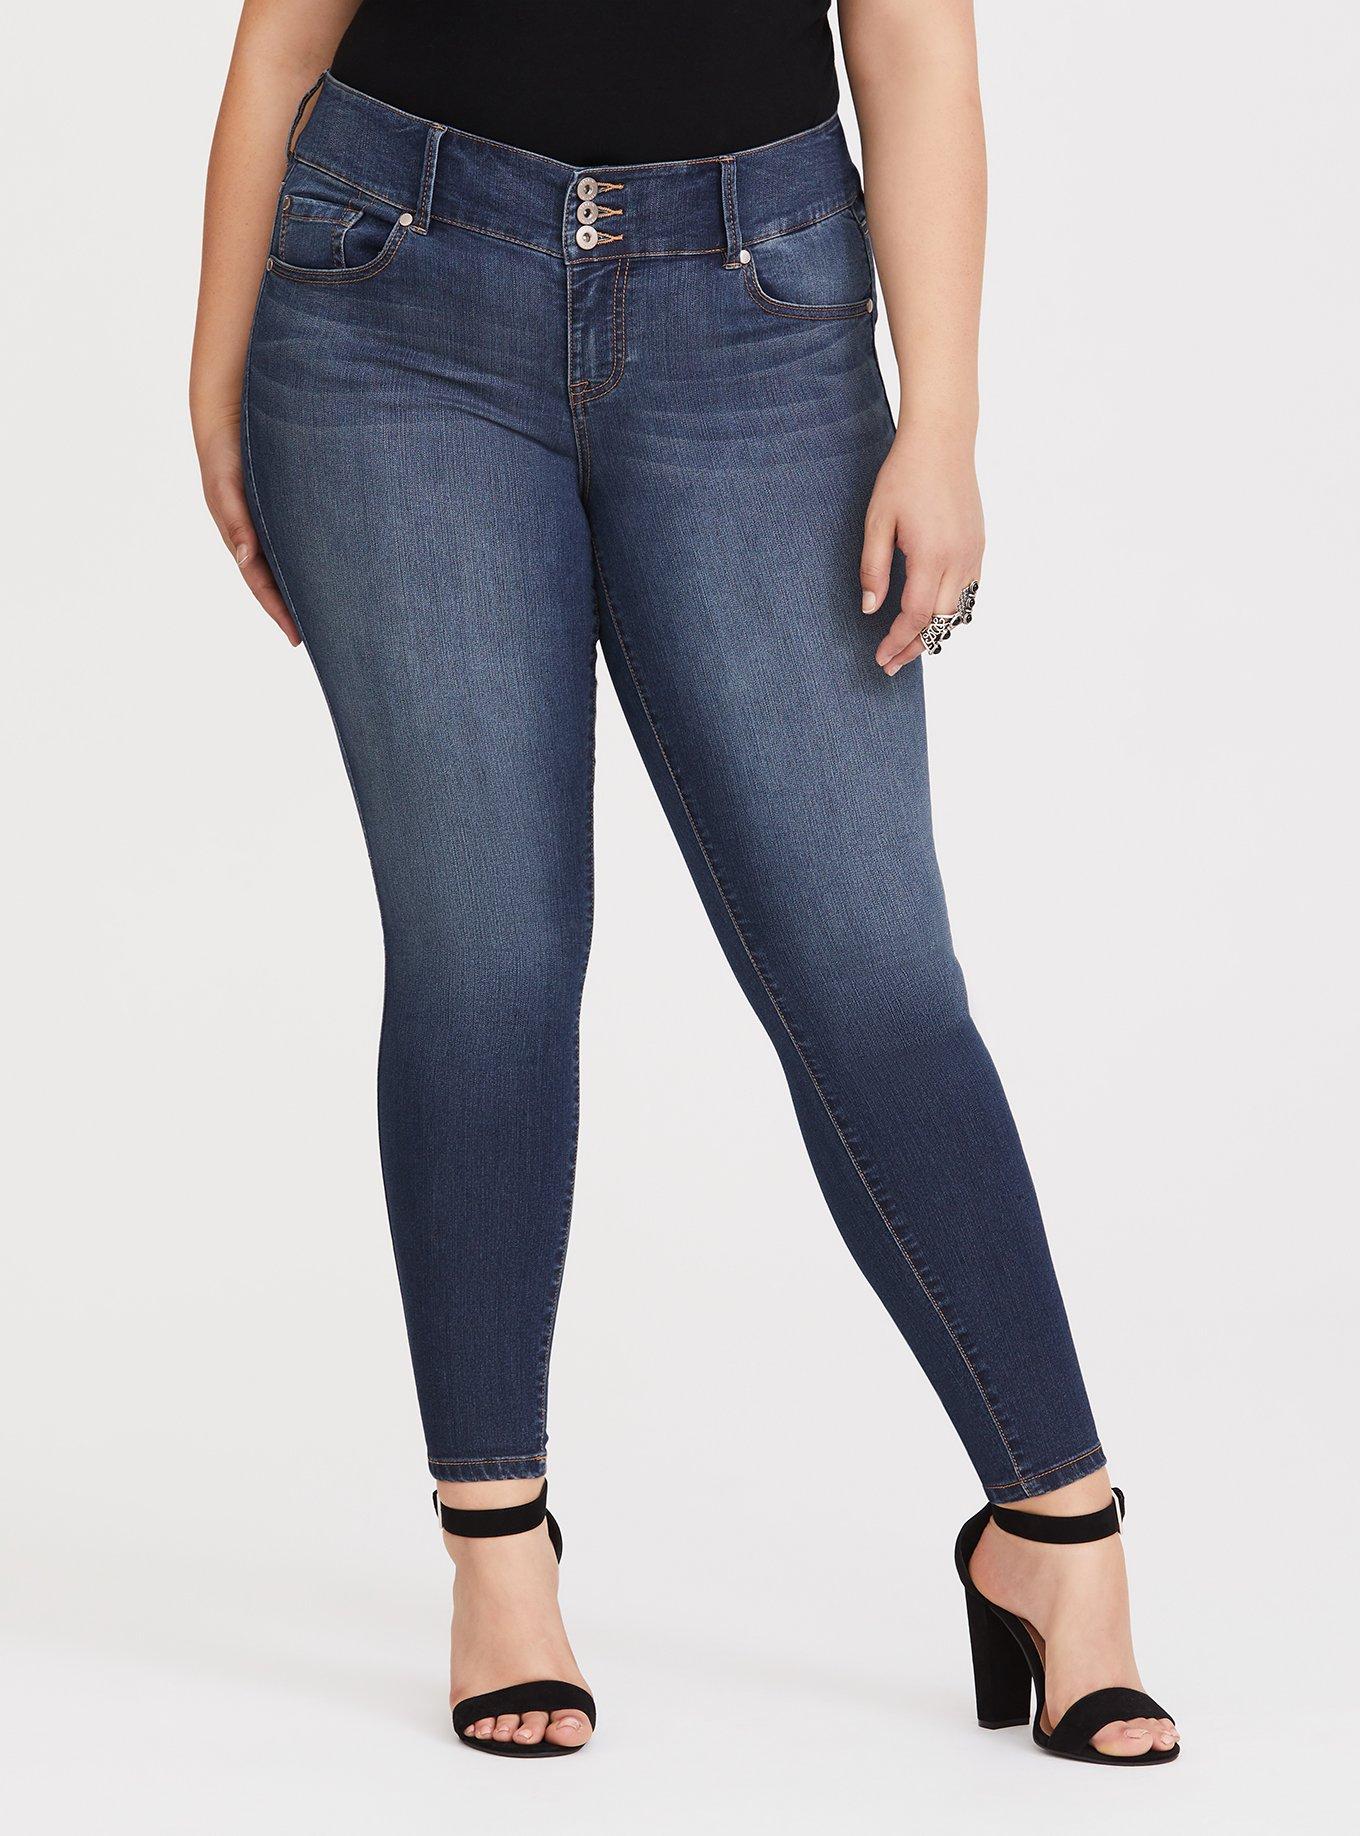 Go Colors - These 360 super stretch denim jeggings are